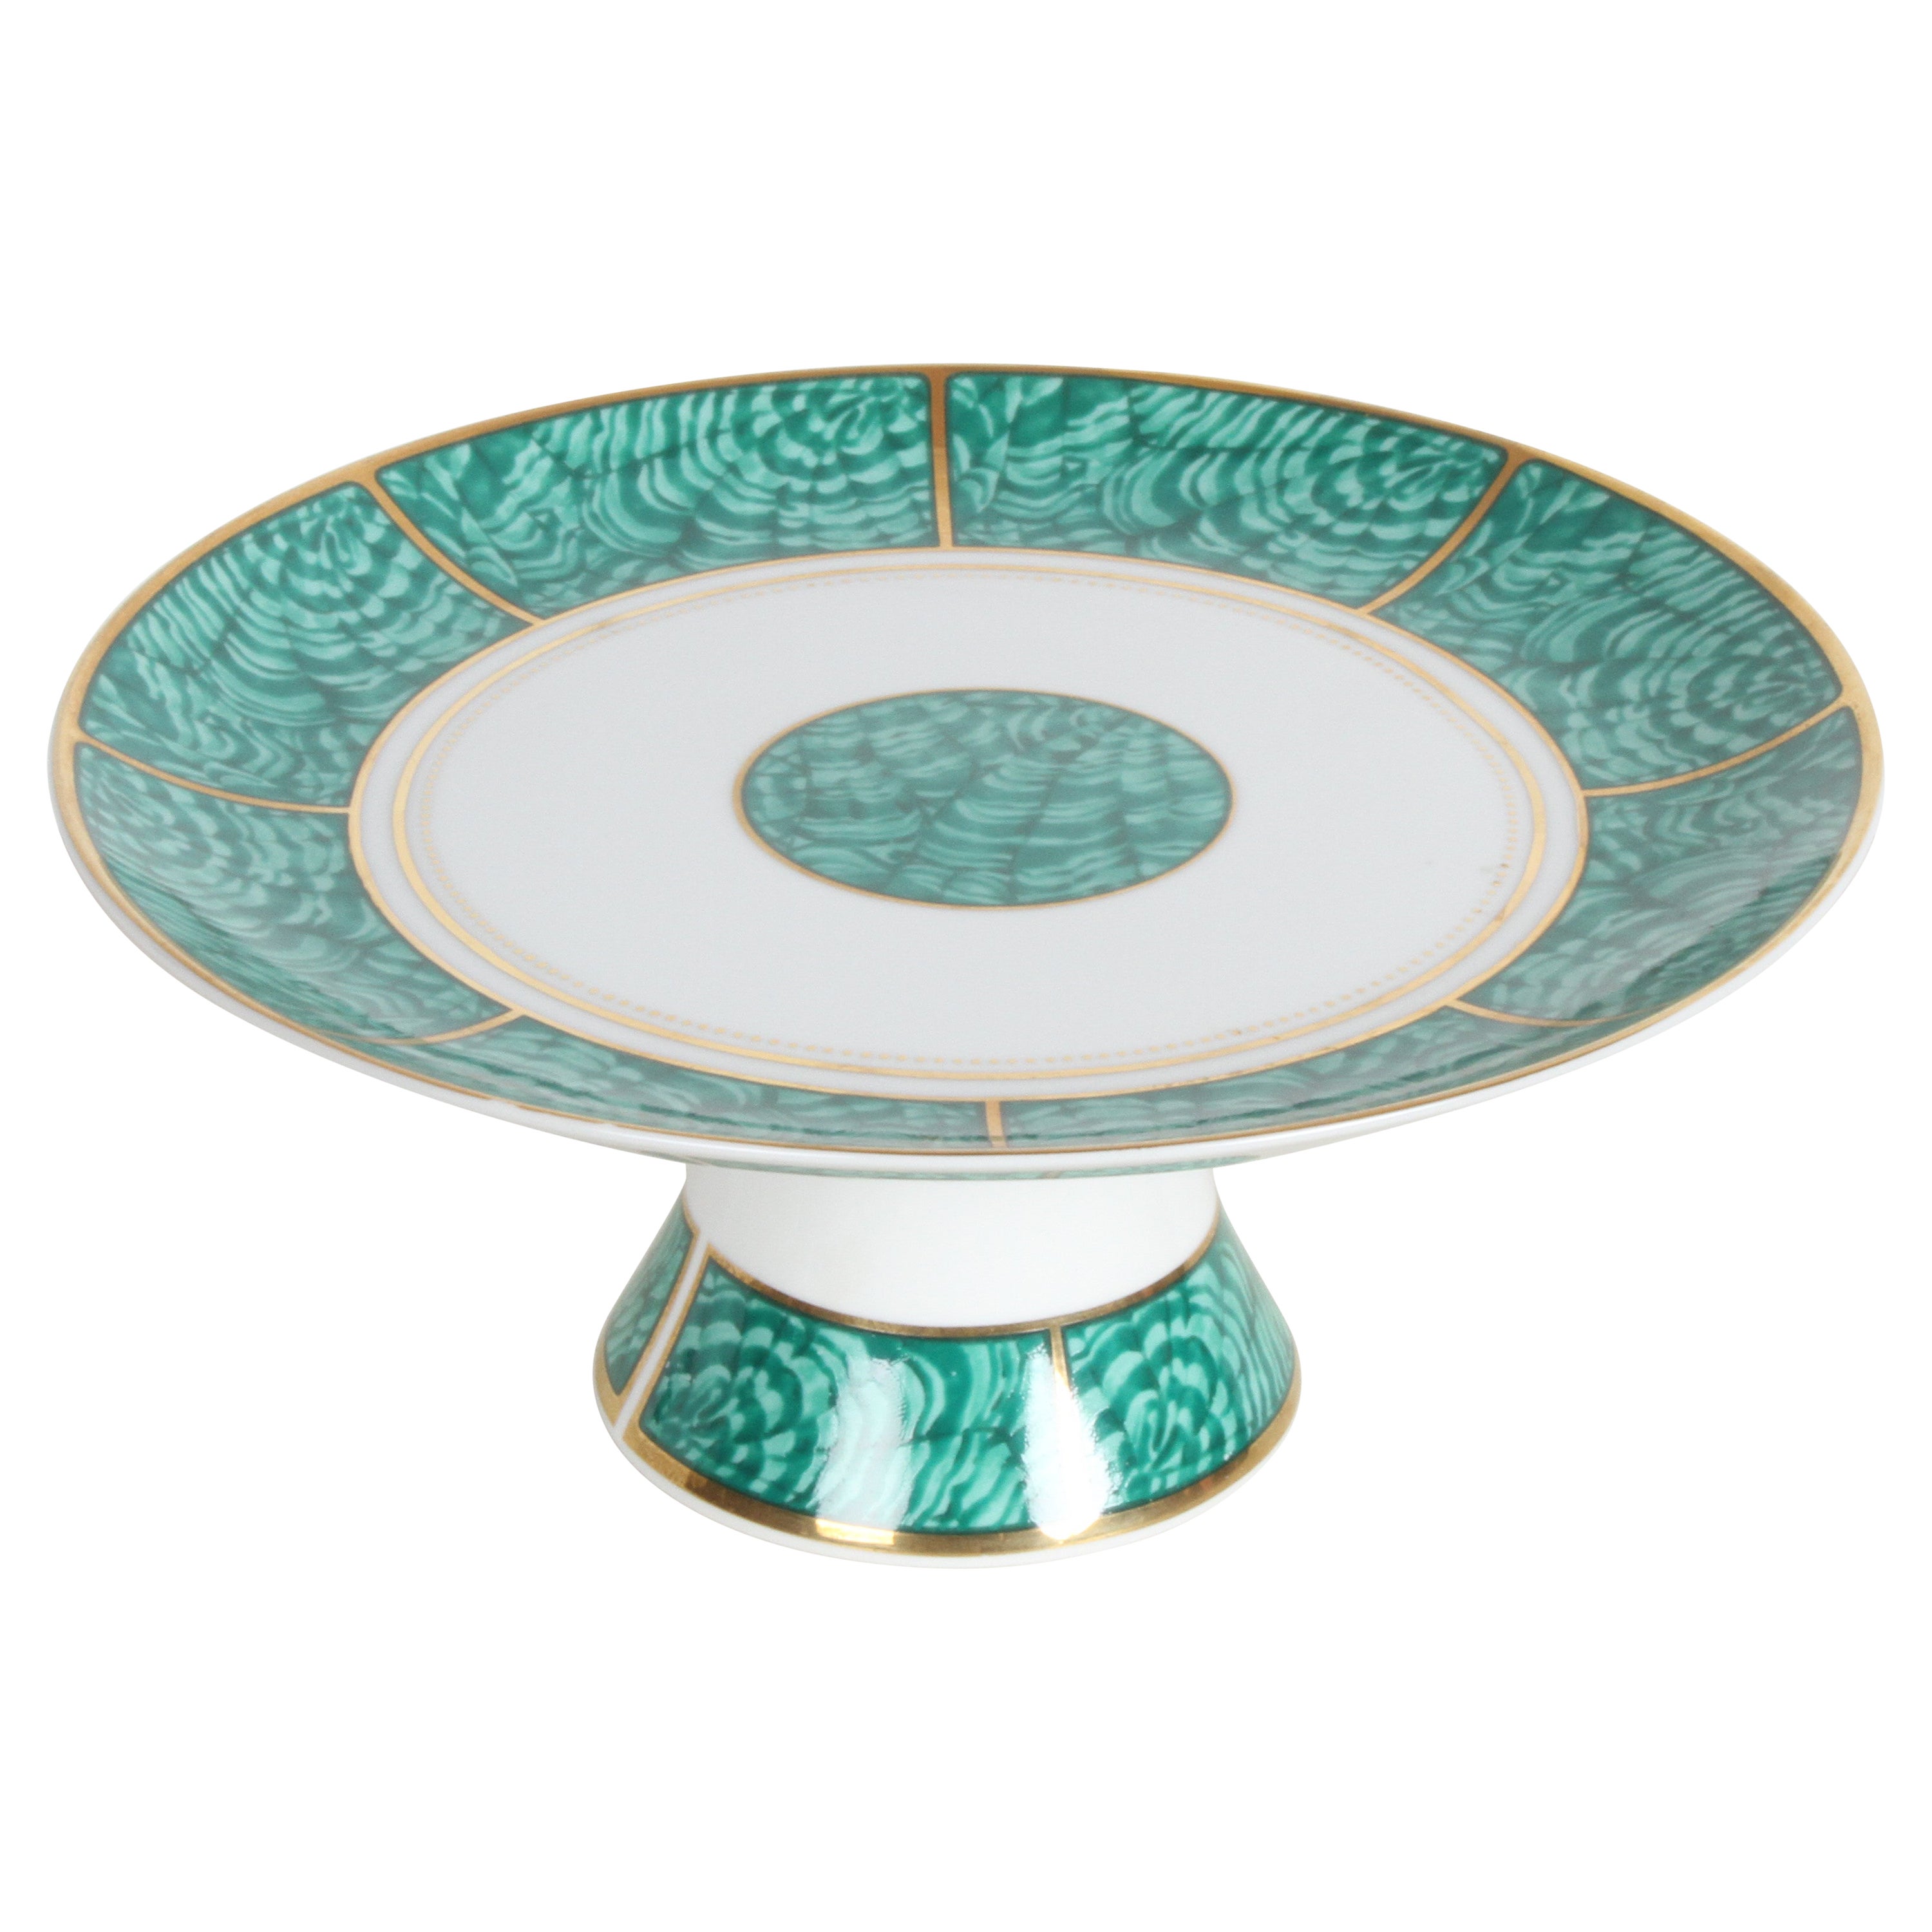 Georges Briard Mid-Century Imperial Malachite China Compote or Cake Stand For Sale